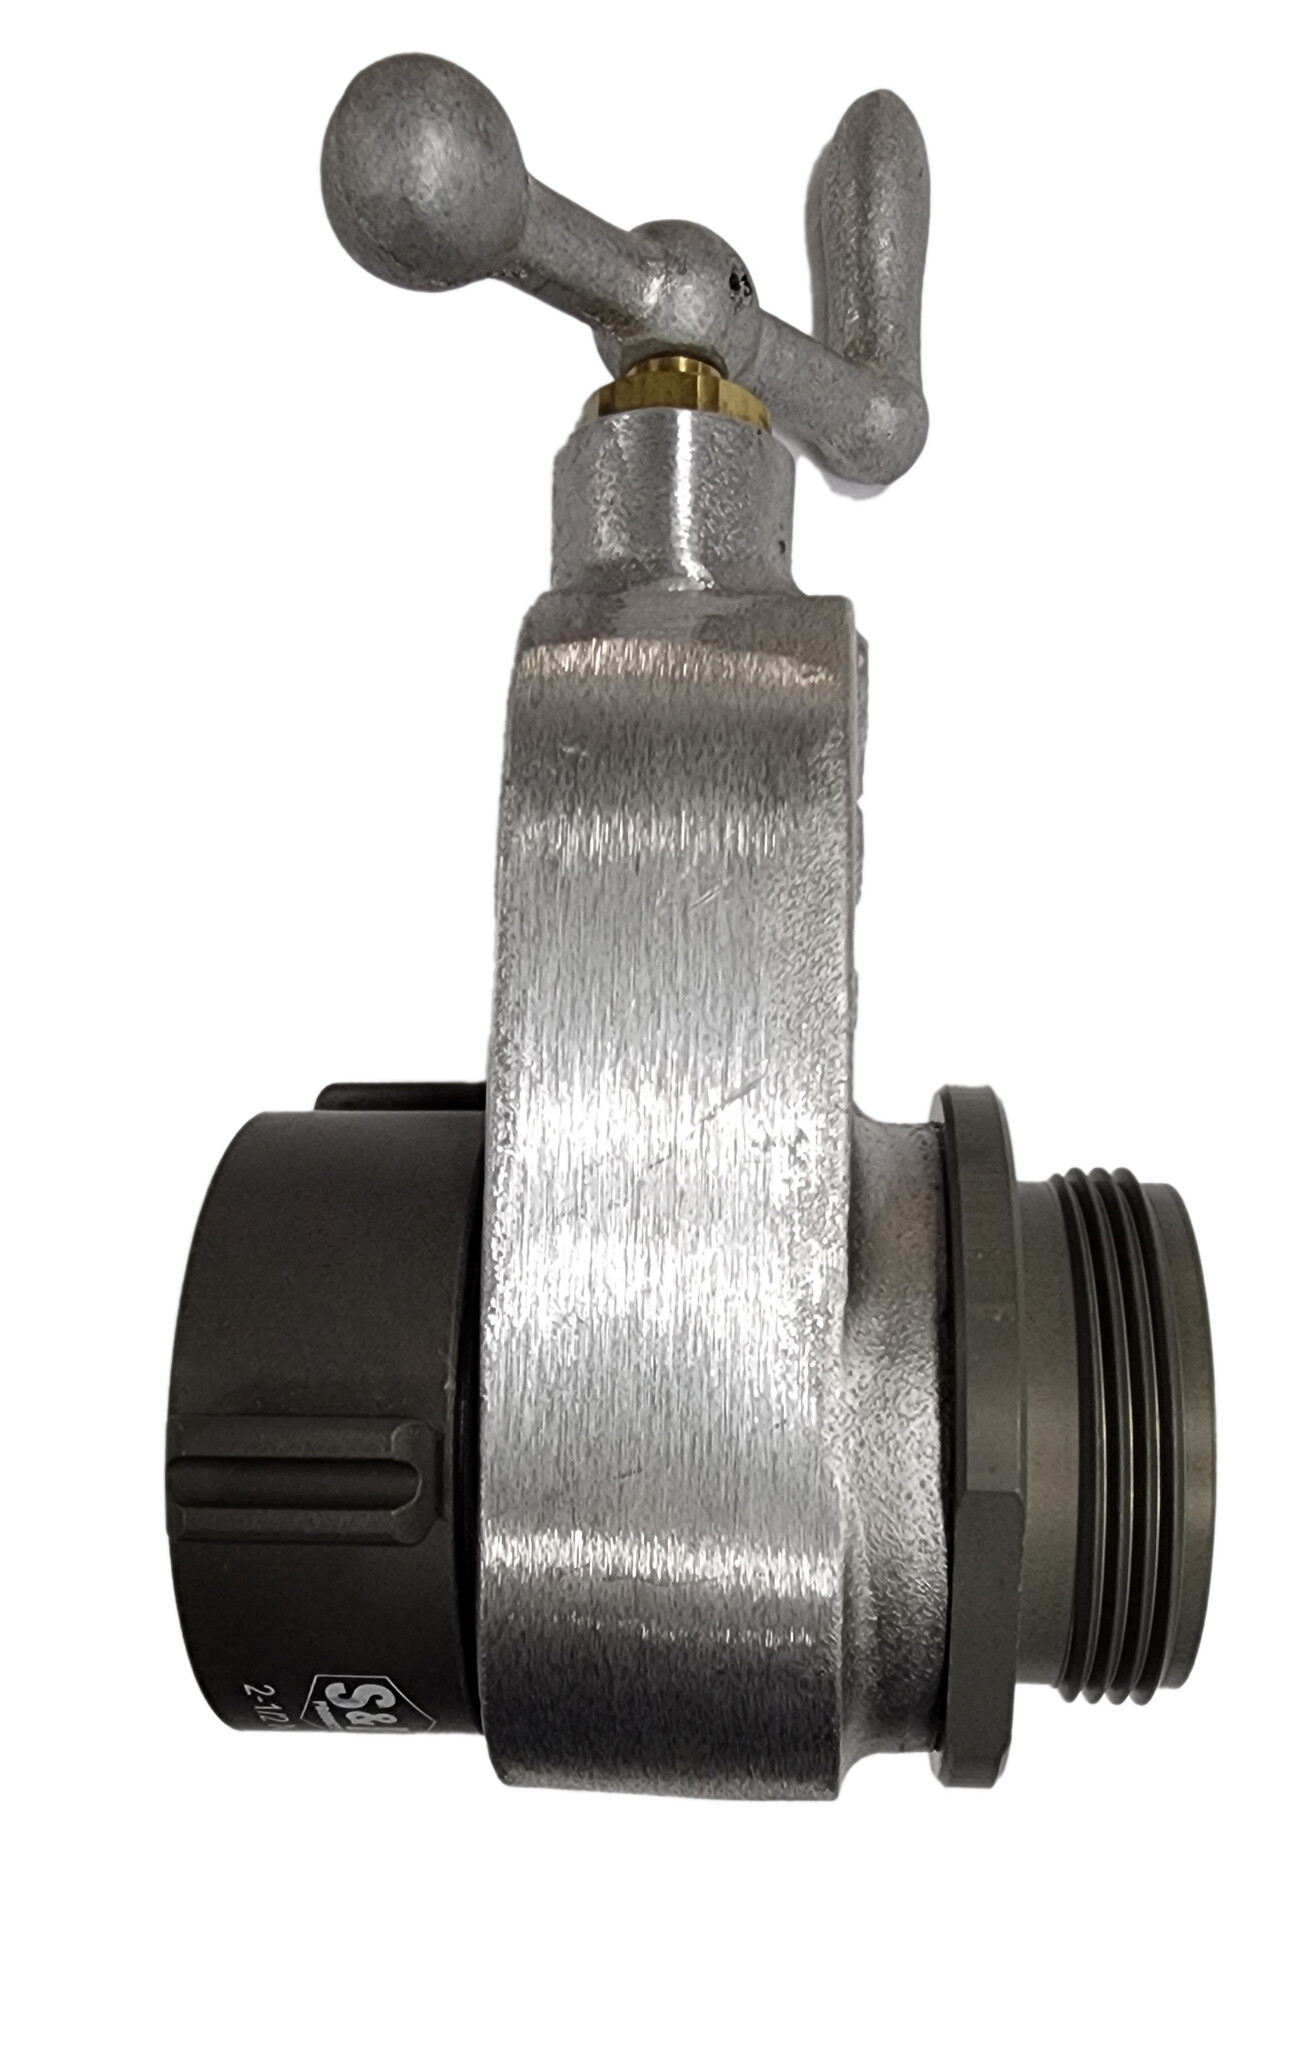 S&H Fire Products S&H 2.5" NH Hydrant Gate Valve